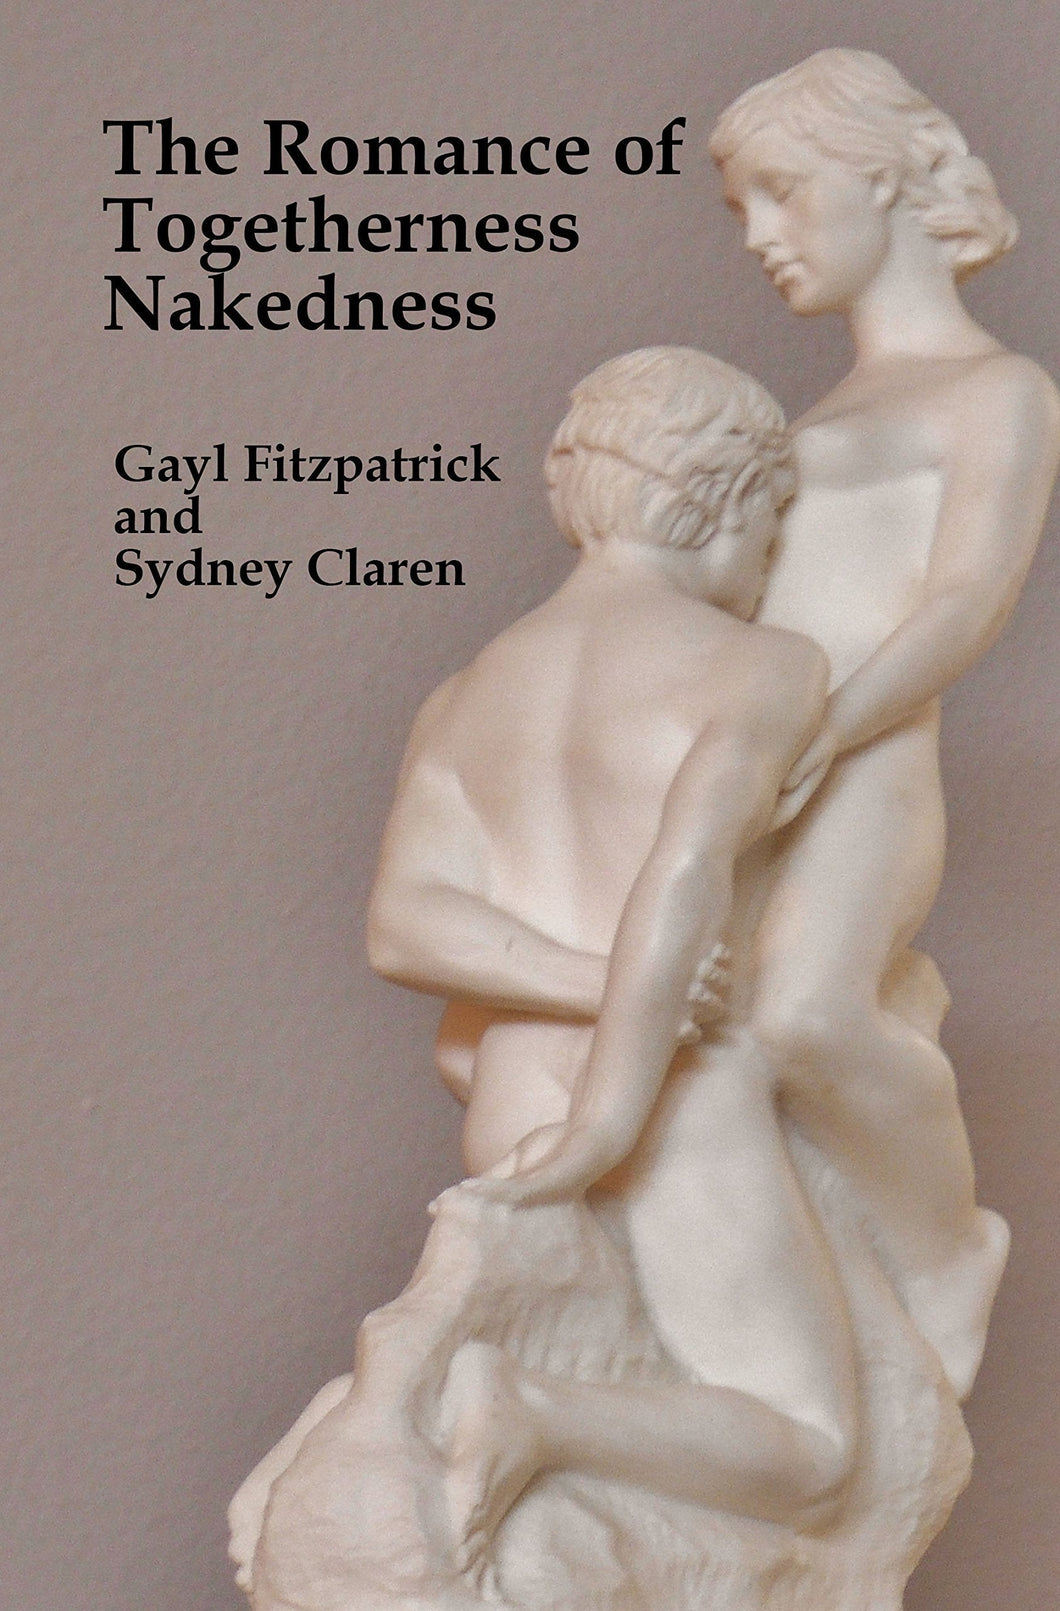 The Romance of Togetherness Nakedness - Starry Night Publishing